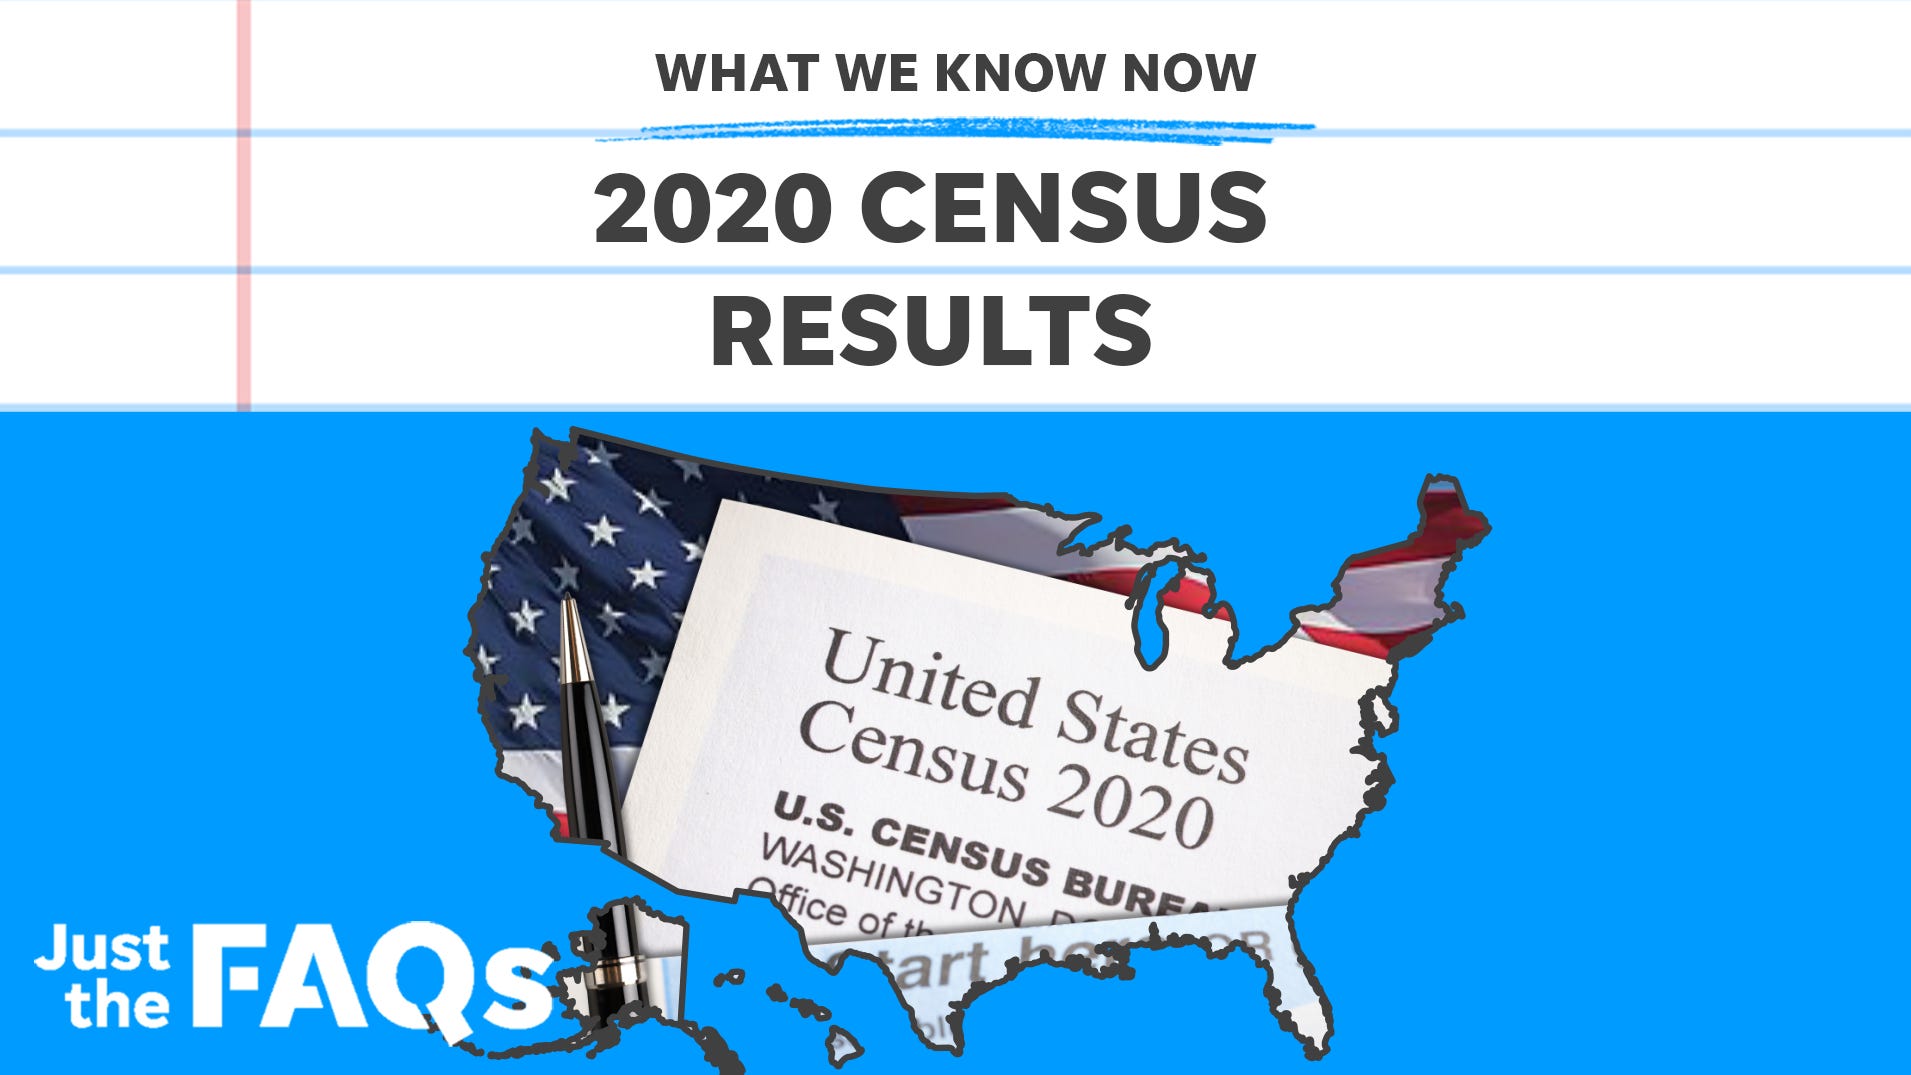 America’s Changing: Census reports greater diversity than ever before | Just the FAQs